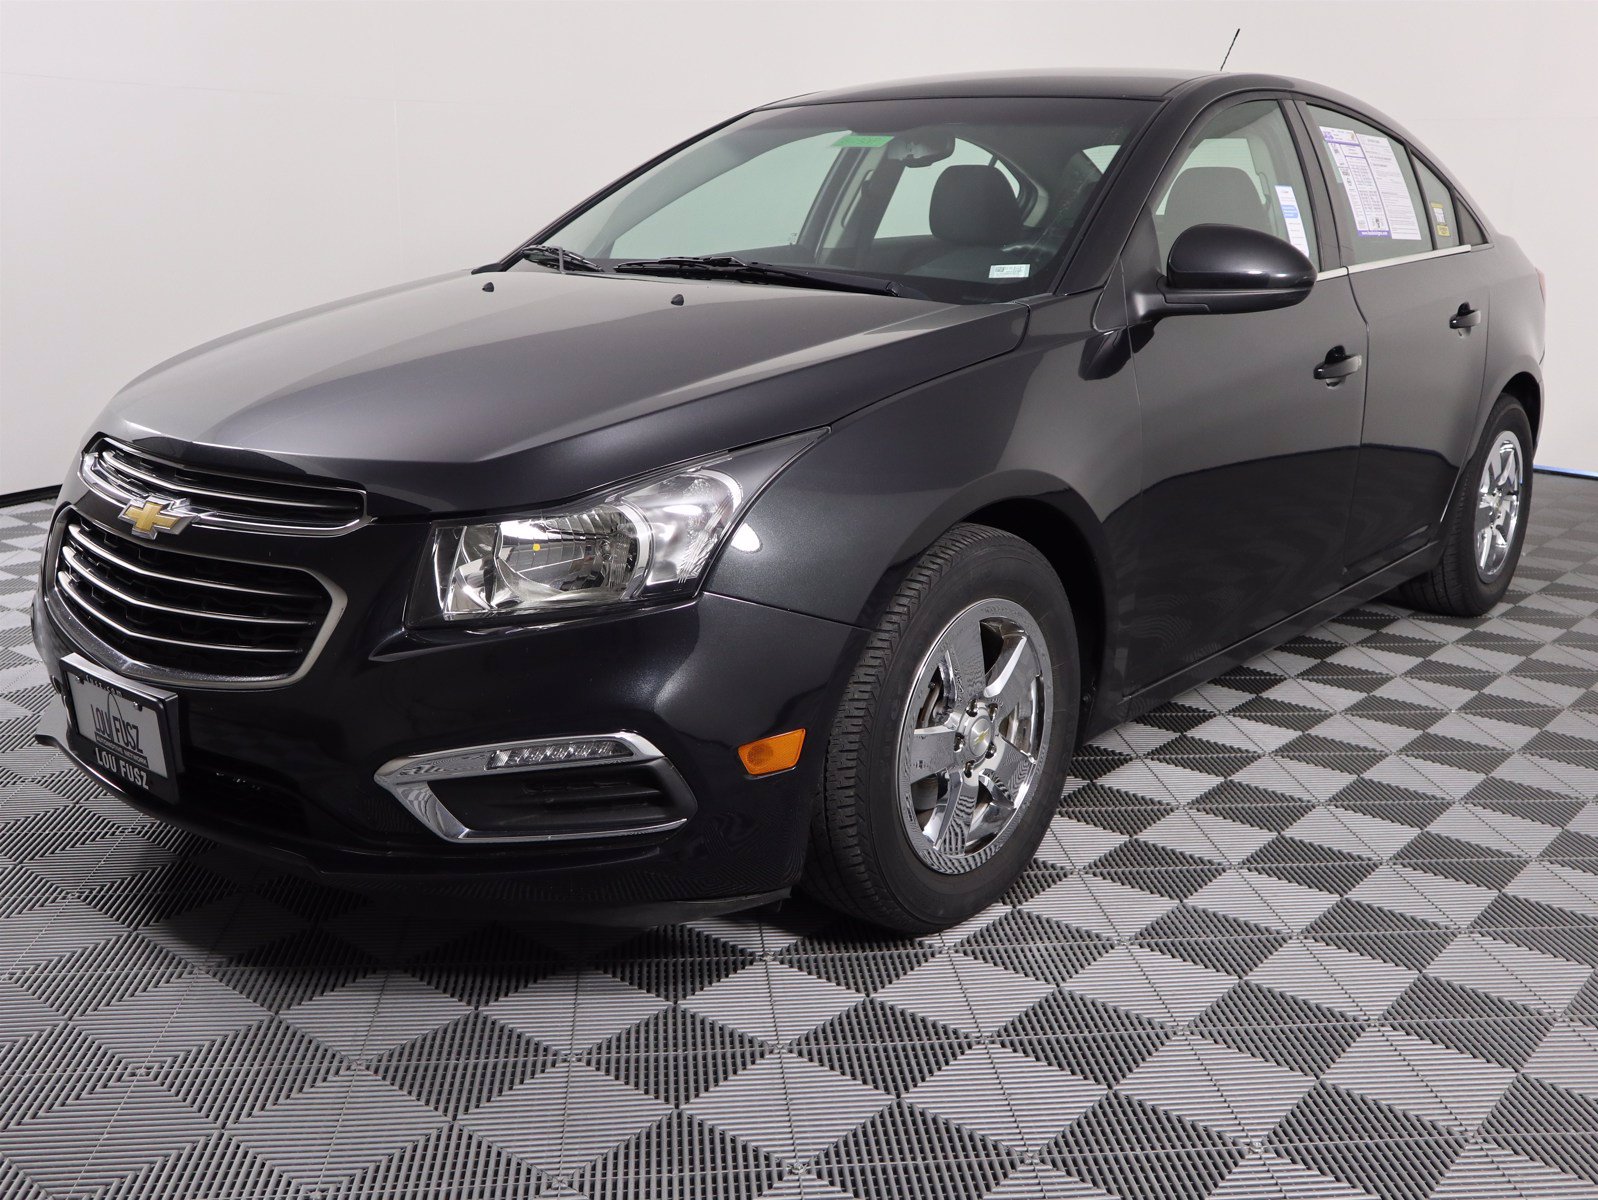 Pre-Owned 2016 Chevrolet Cruze Limited LT FWD 4dr Car